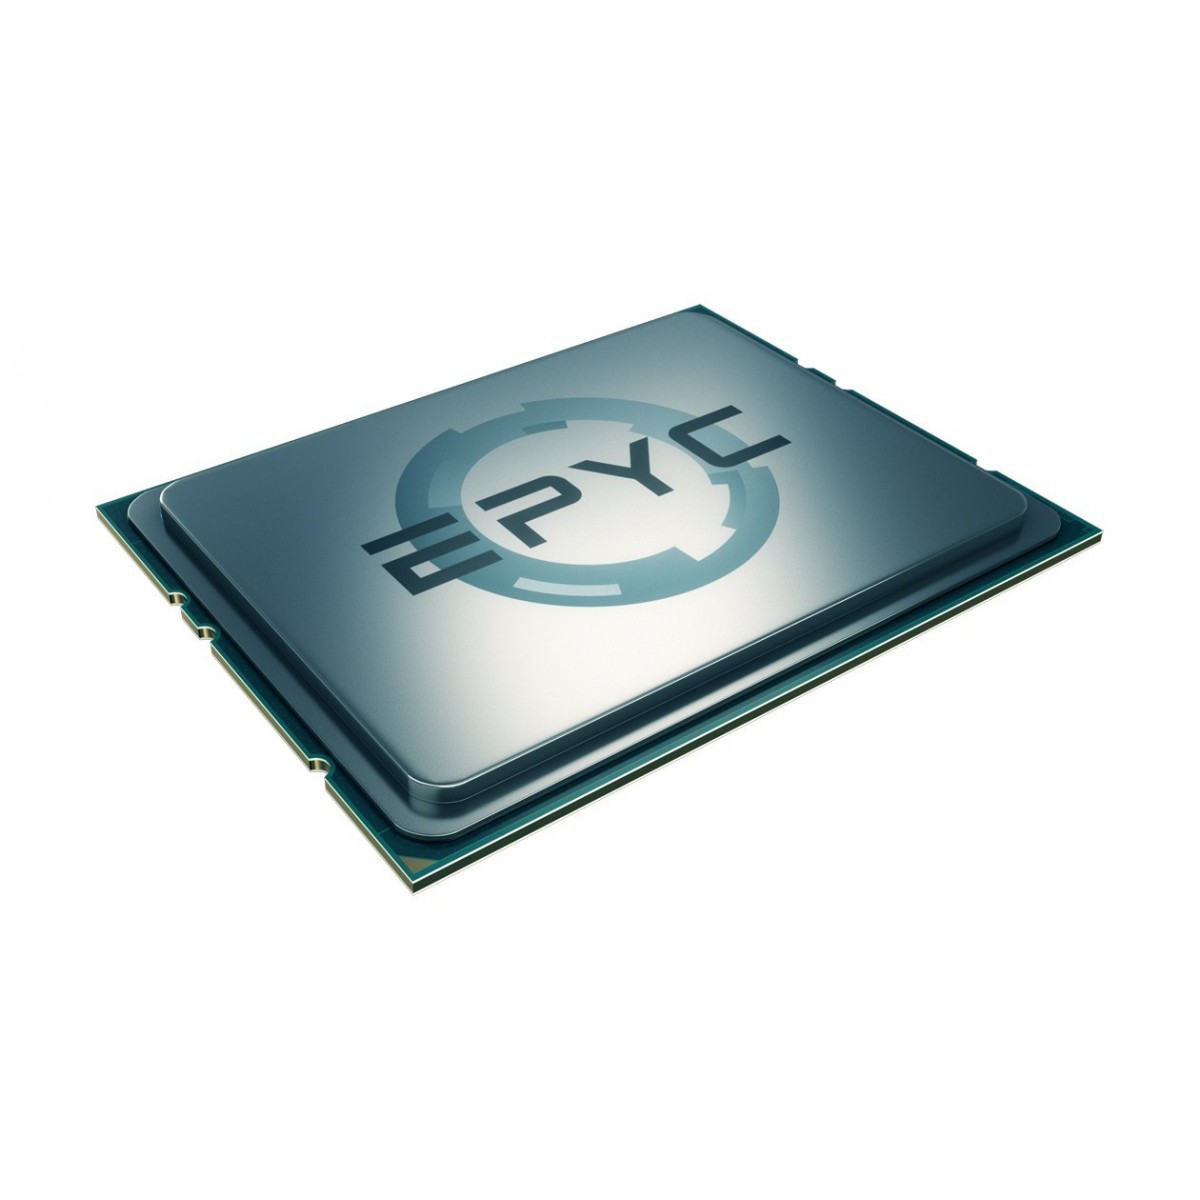 AMD CPU EPYC 7000 Series 32C/64T Model 7551P (2.0/3.0GHz max Boost, 64MB,180W,SP3) tray